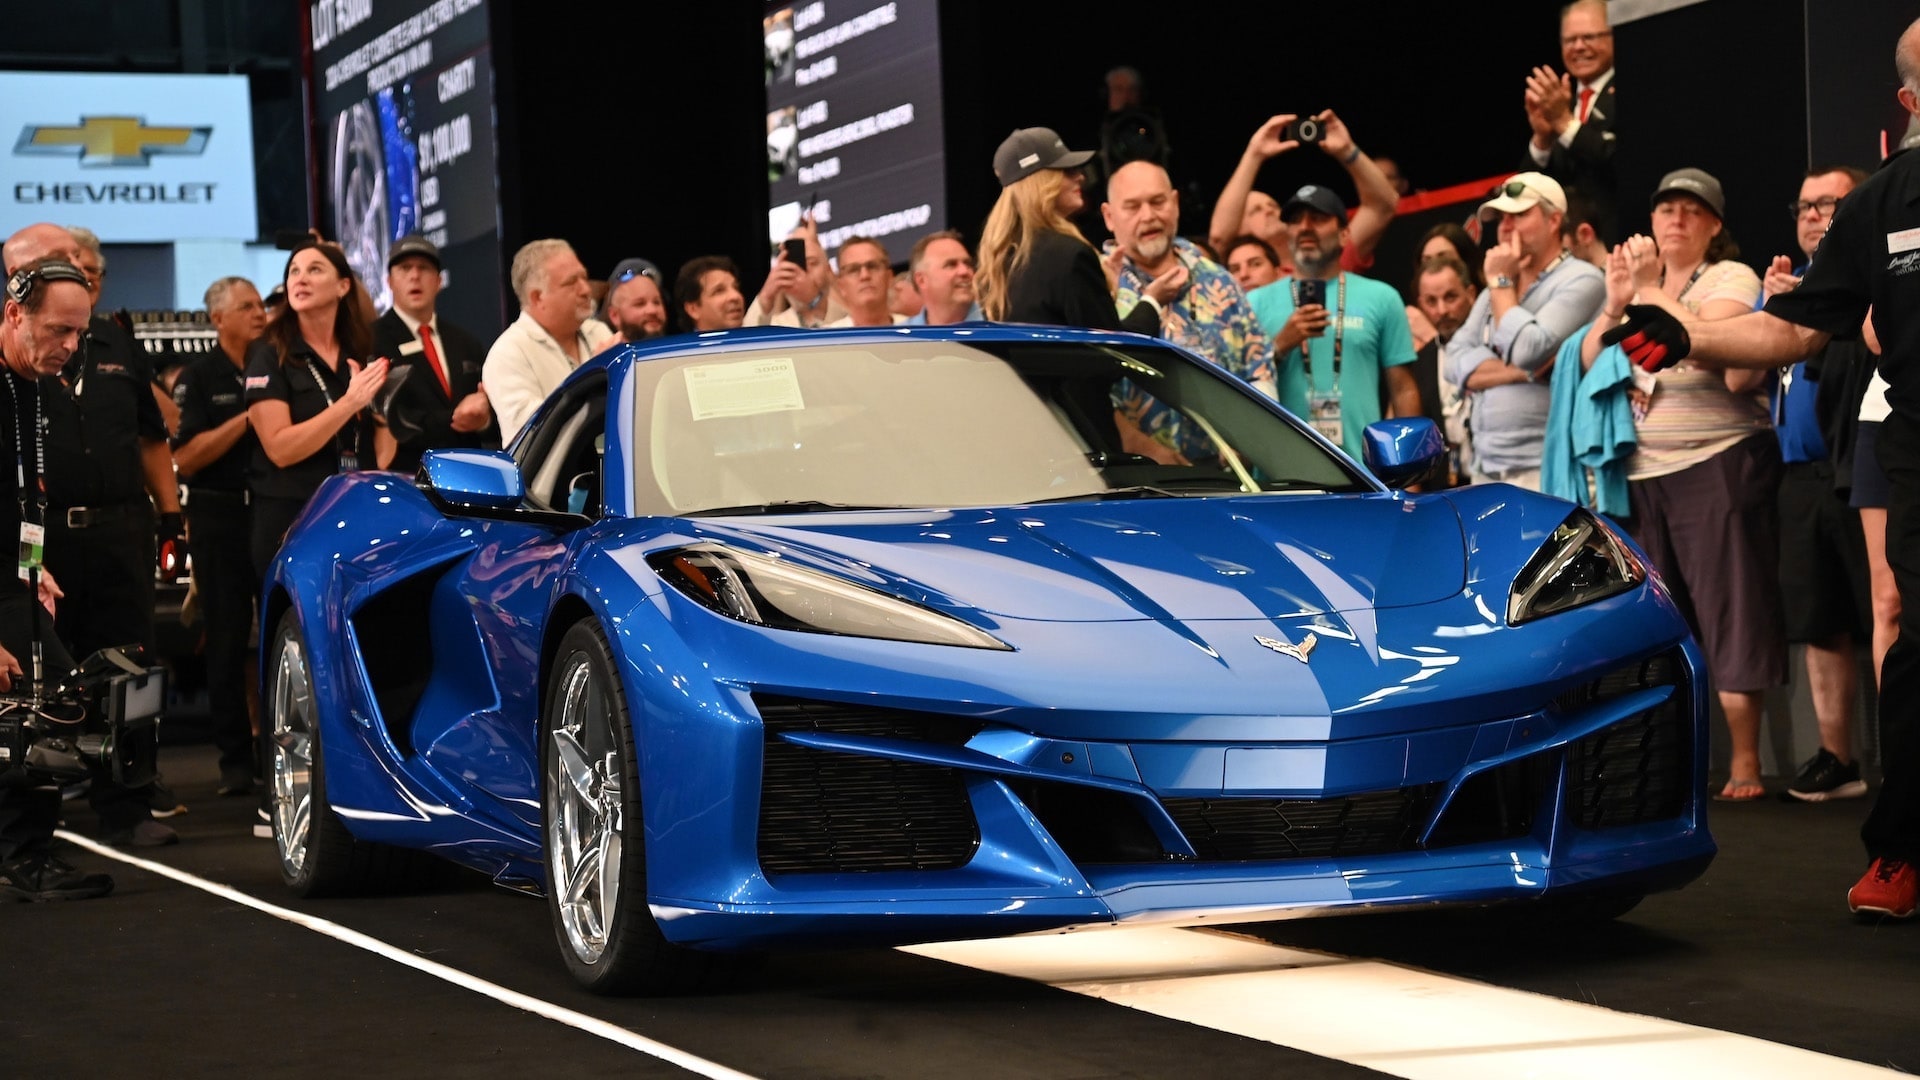 More than a million for first Corvette E-Ray Hybrid